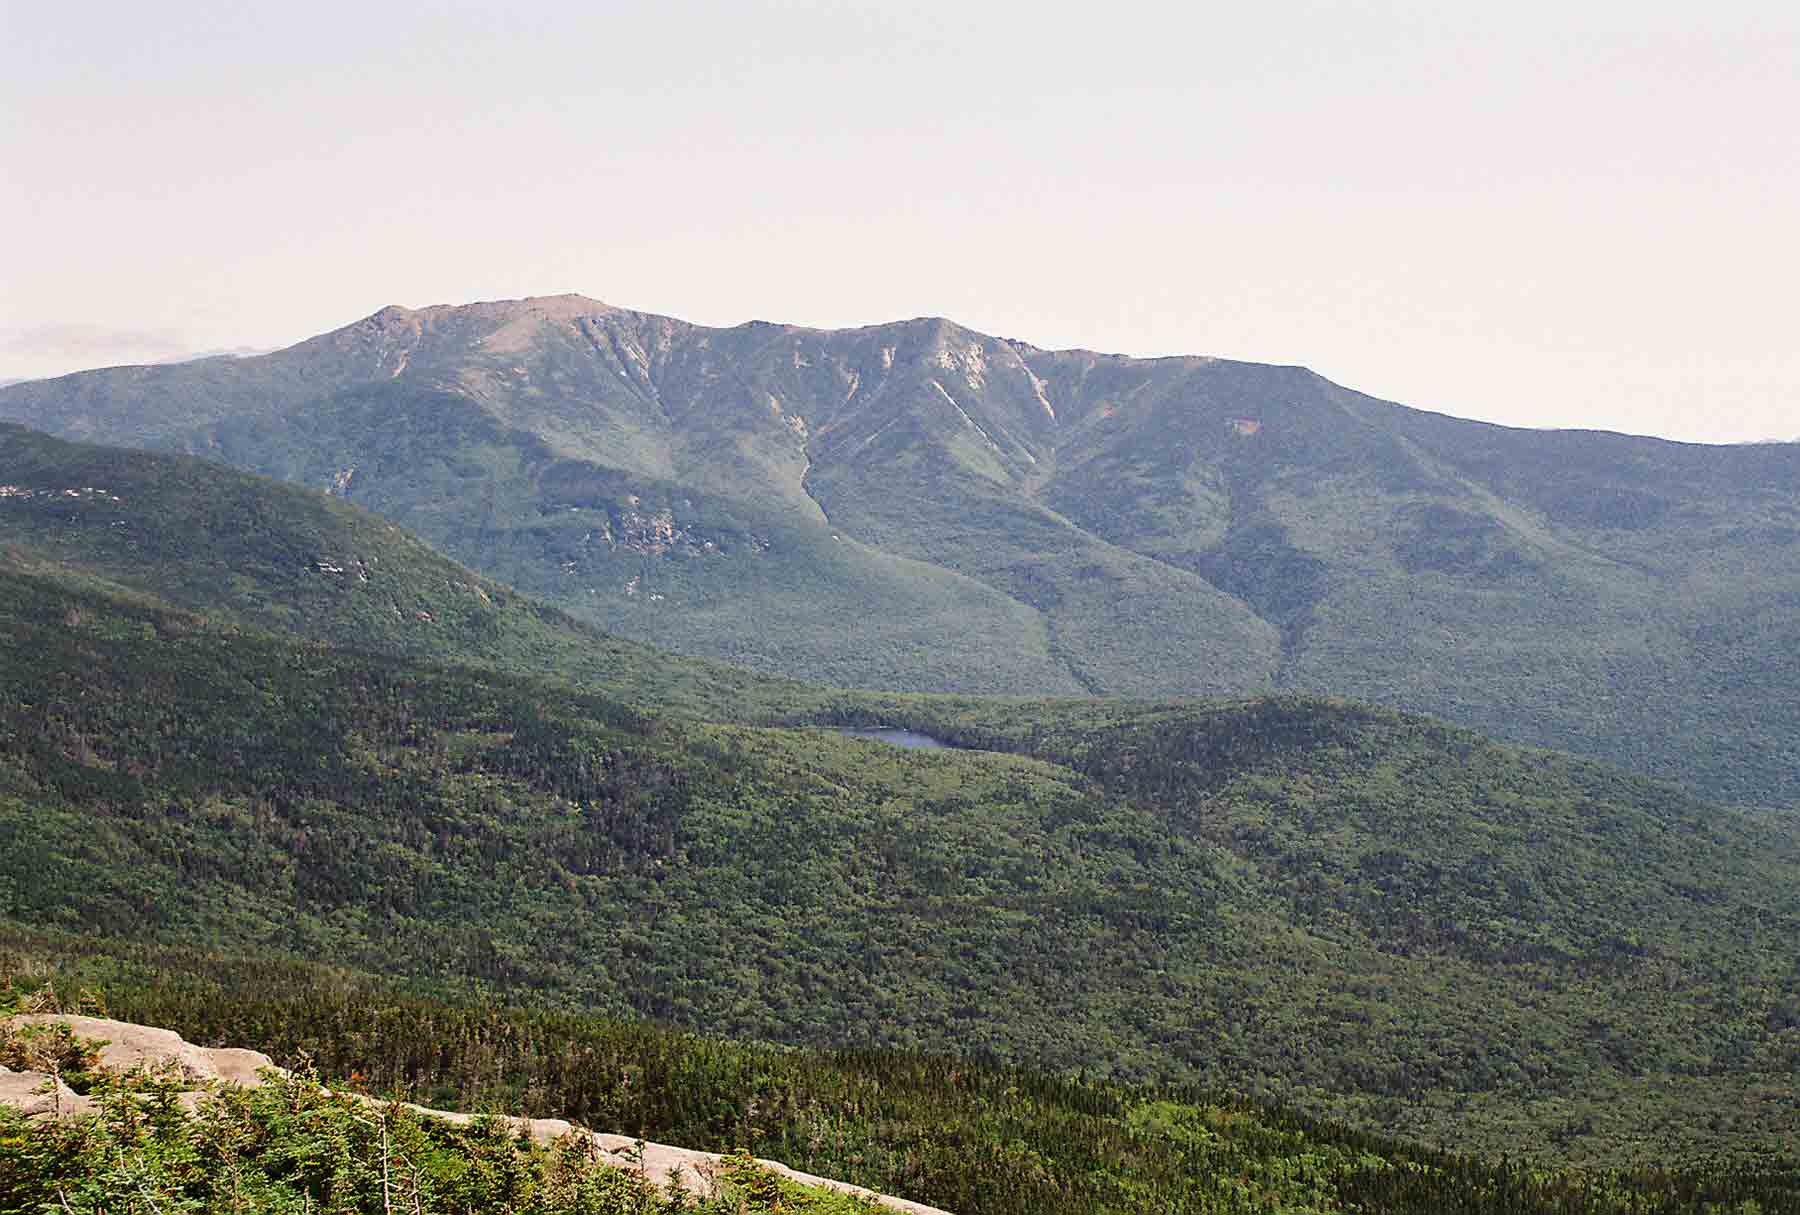 mm 5.4 - View east from North Kinsman Mt. The northbound AT descends to Lonesome Lake (center of picture), then continues descent into Franconia Notch.  It then climbs to the Franconia Ridge, reaching it somewhere near the far right of the picture.  The trail follow this ridge over Mt Lincoln and then Mt. Lafayette, the latter being the highest peak visible in the picture.   Courtesy dlcul@conncoll.edu